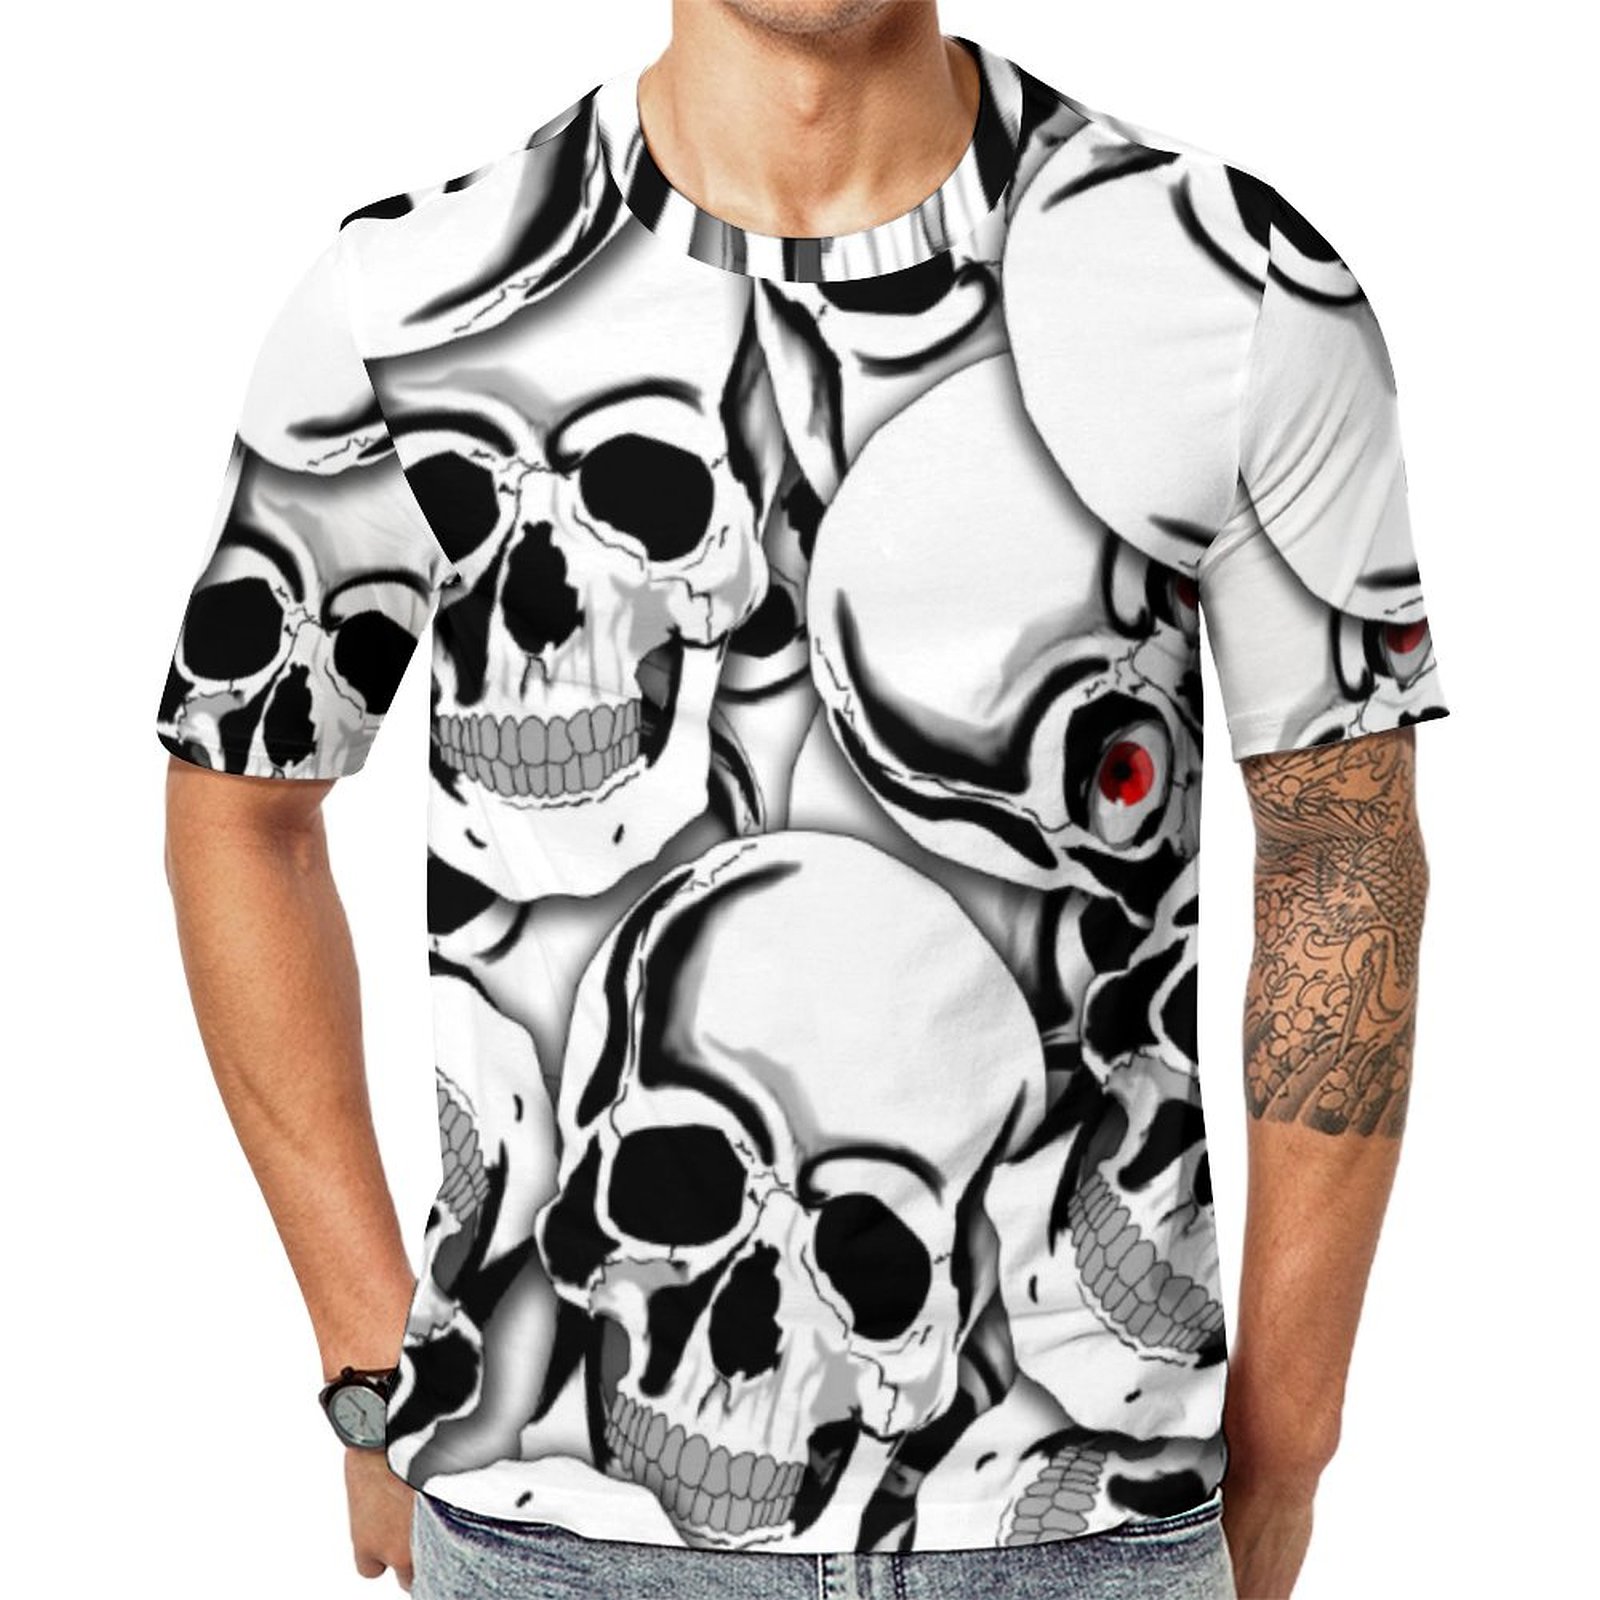 Pile Of Skulls Red Eye Short Sleeve Print Unisex Tshirt Summer Casual Tees for Men and Women Coolcoshirts